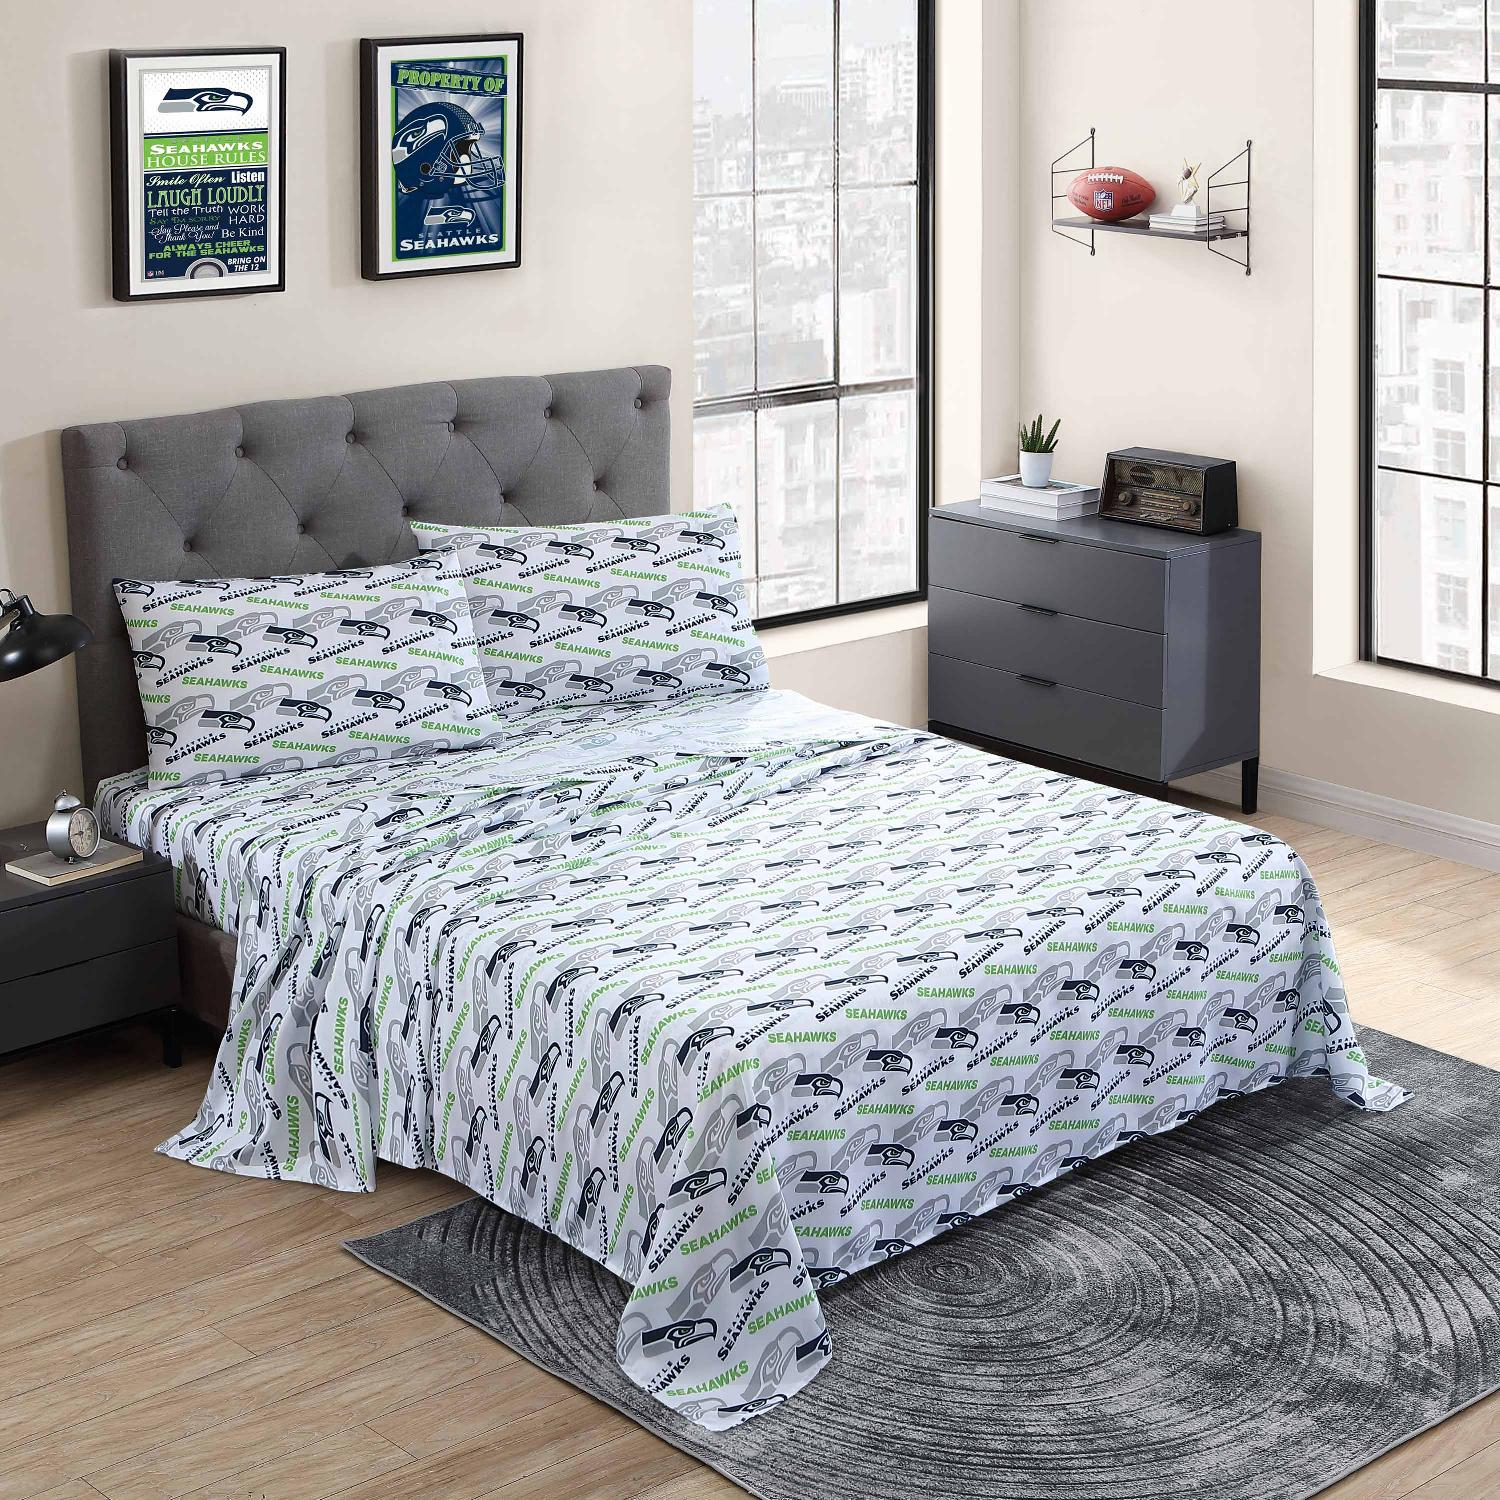 Seattle Seahawks NFL Officially Licensed 4-Piece Sheet Set - Bed